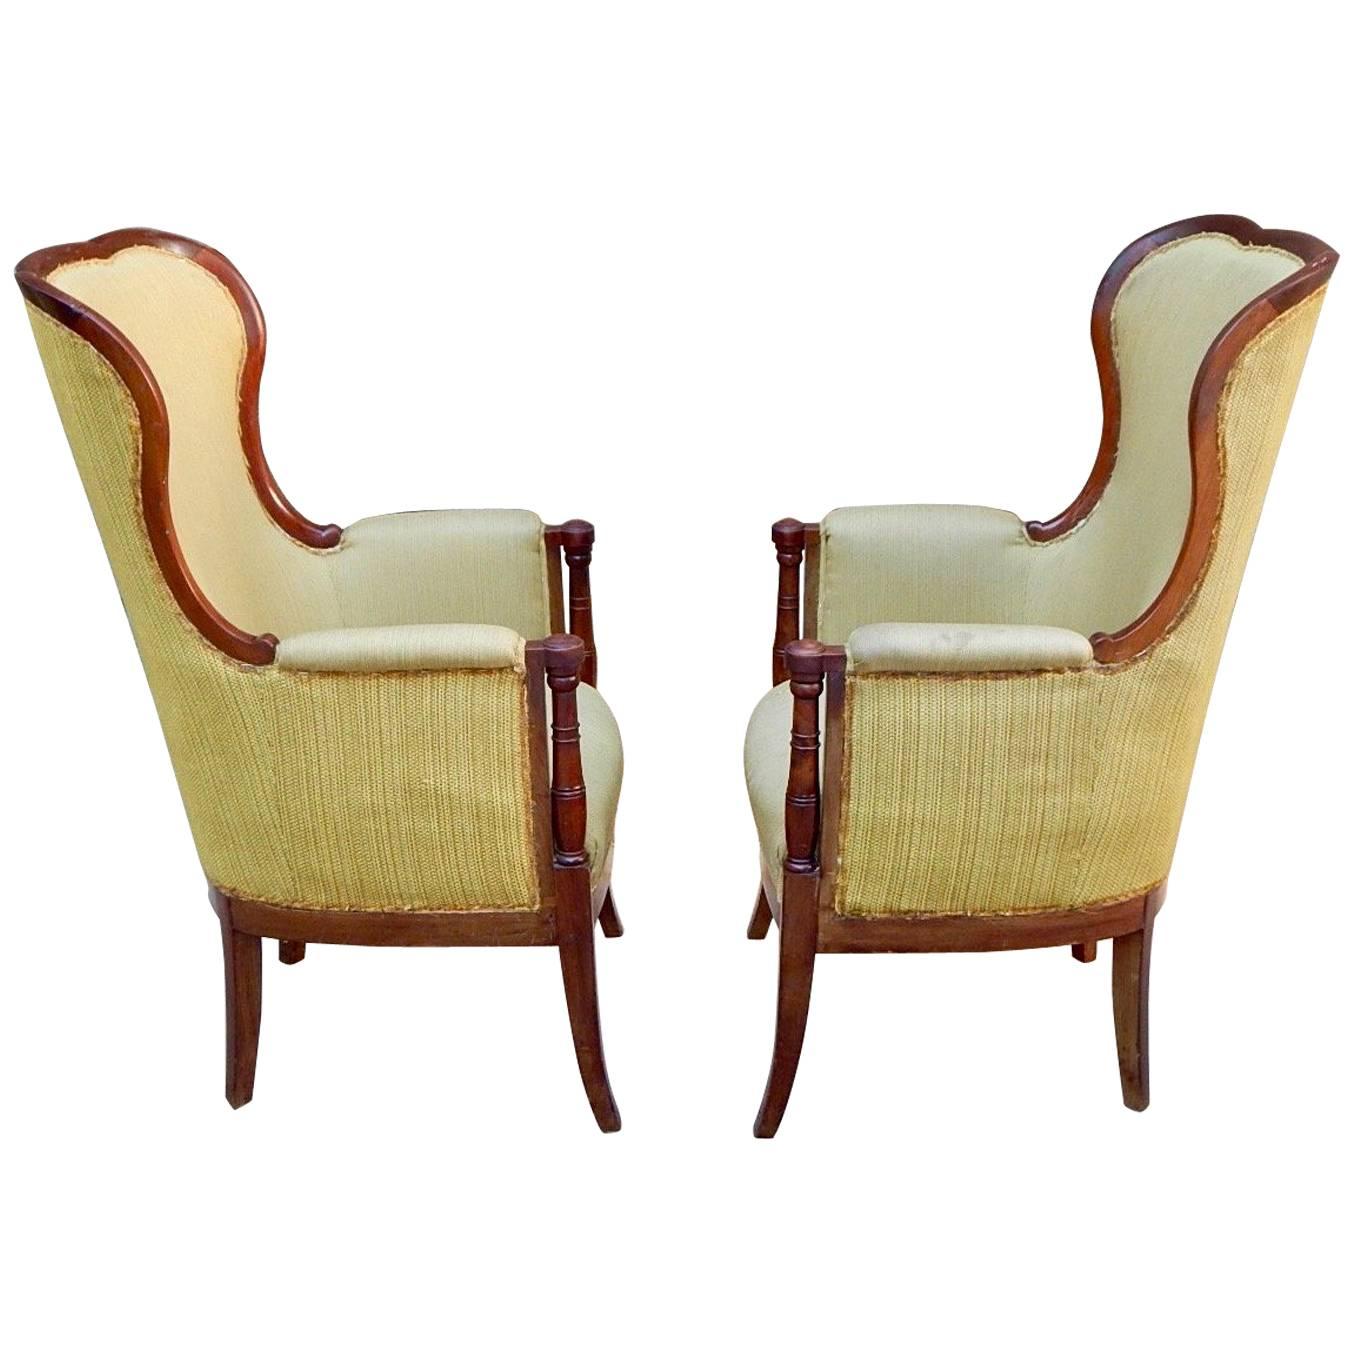 Pair of Swedish 1920's Exposed Frame Winged Back Chairs in Mahogany For Sale